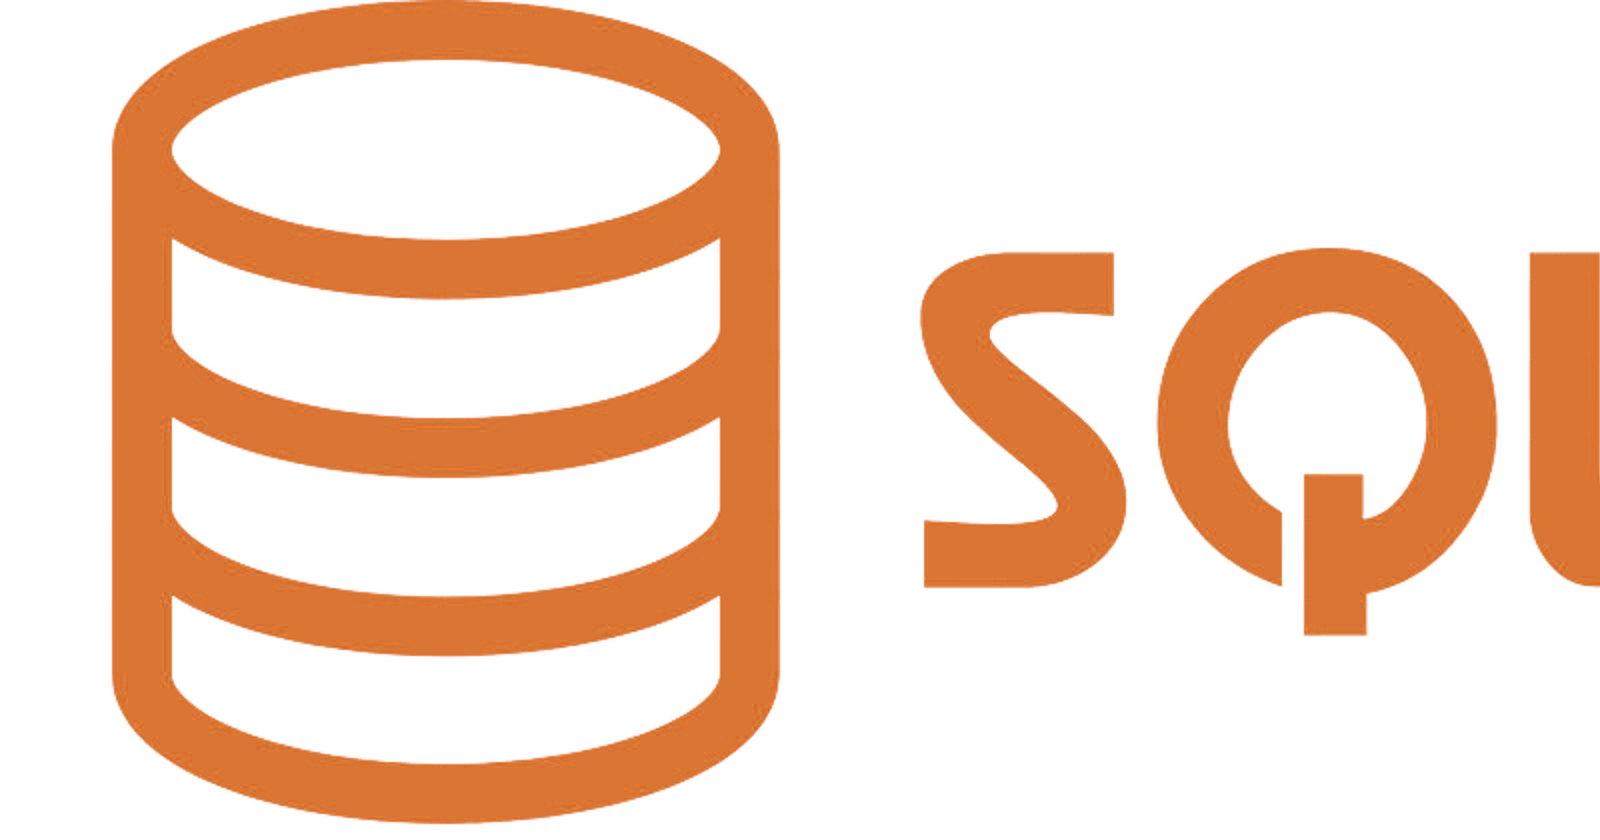 Type Casting in SQL datetime to date